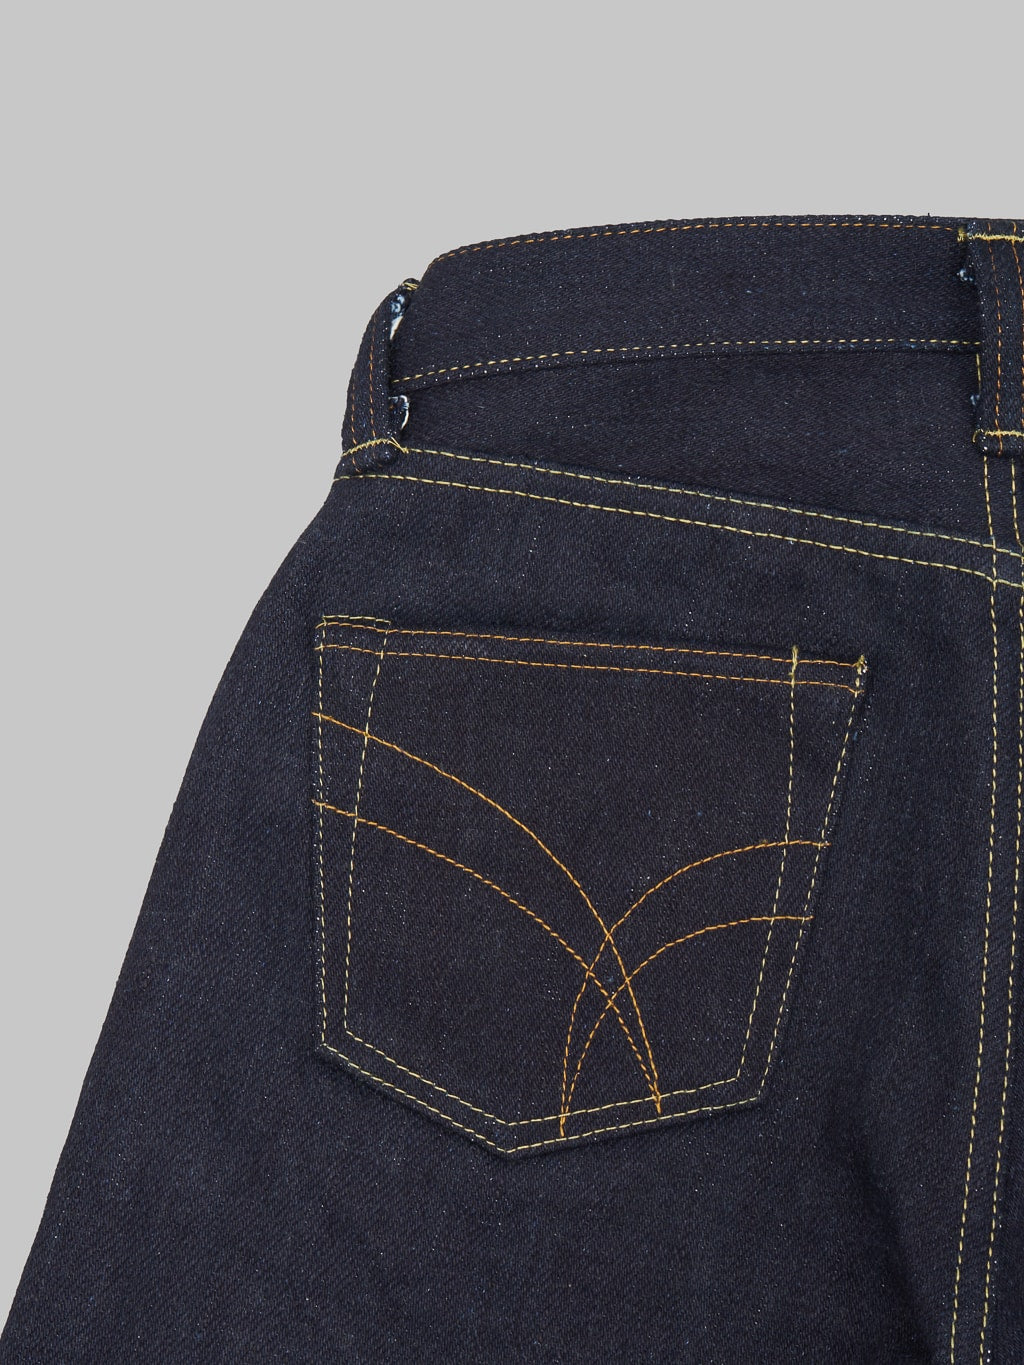 The Strike Gold Extra Heavyweight straight tapered jeans pocket stitching